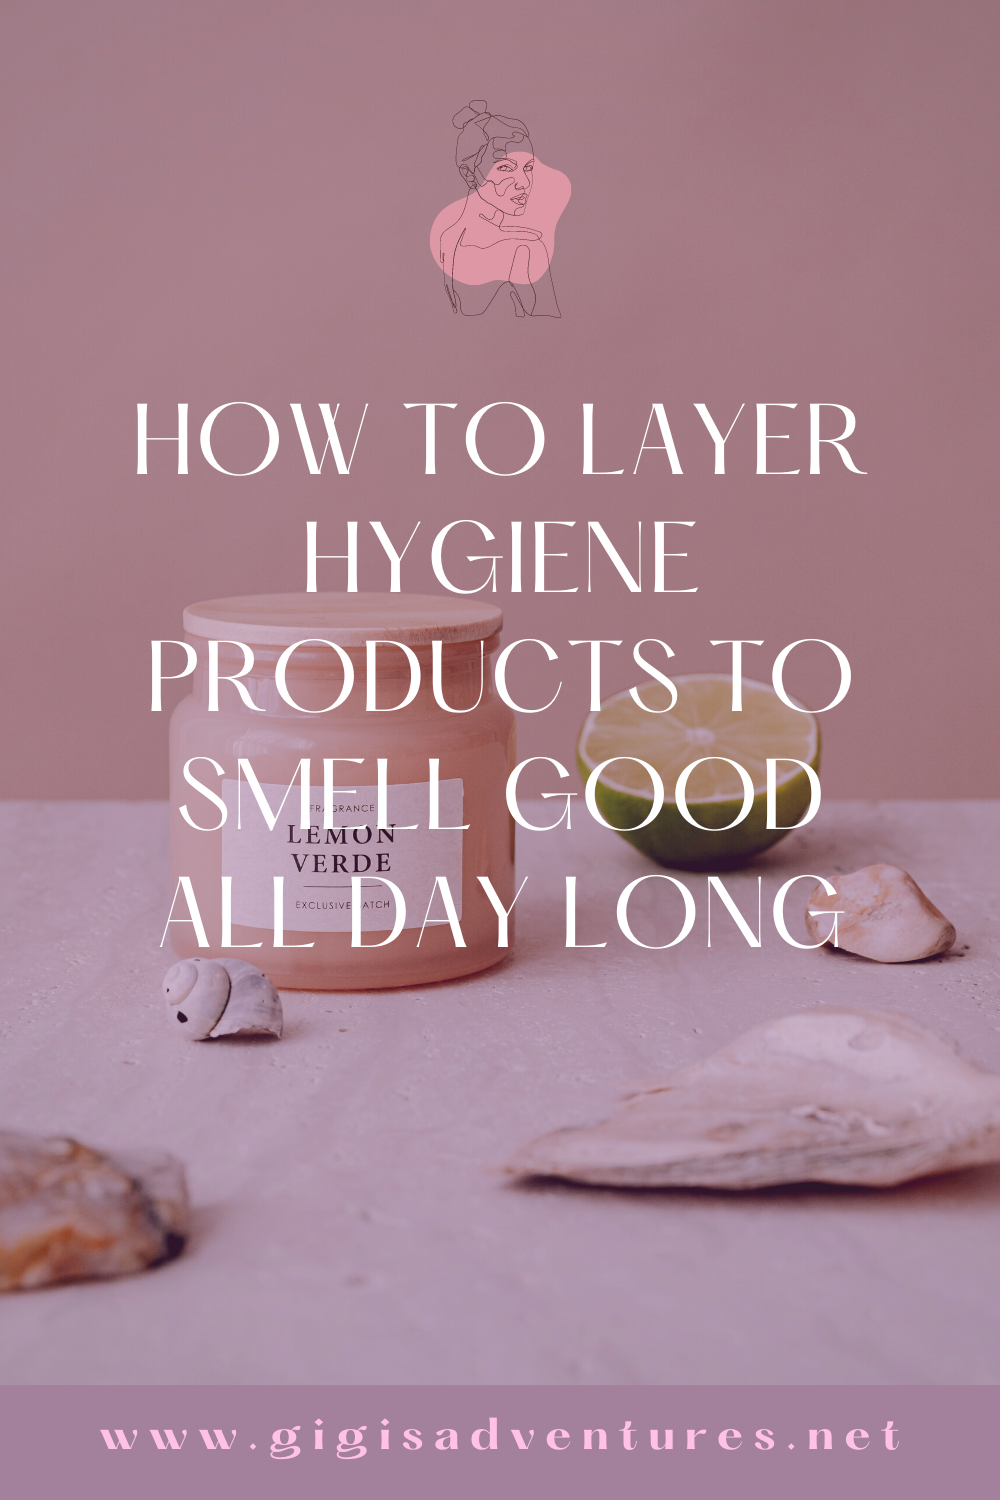 How To Layer Hygiene Products To Smell Good All Day Long